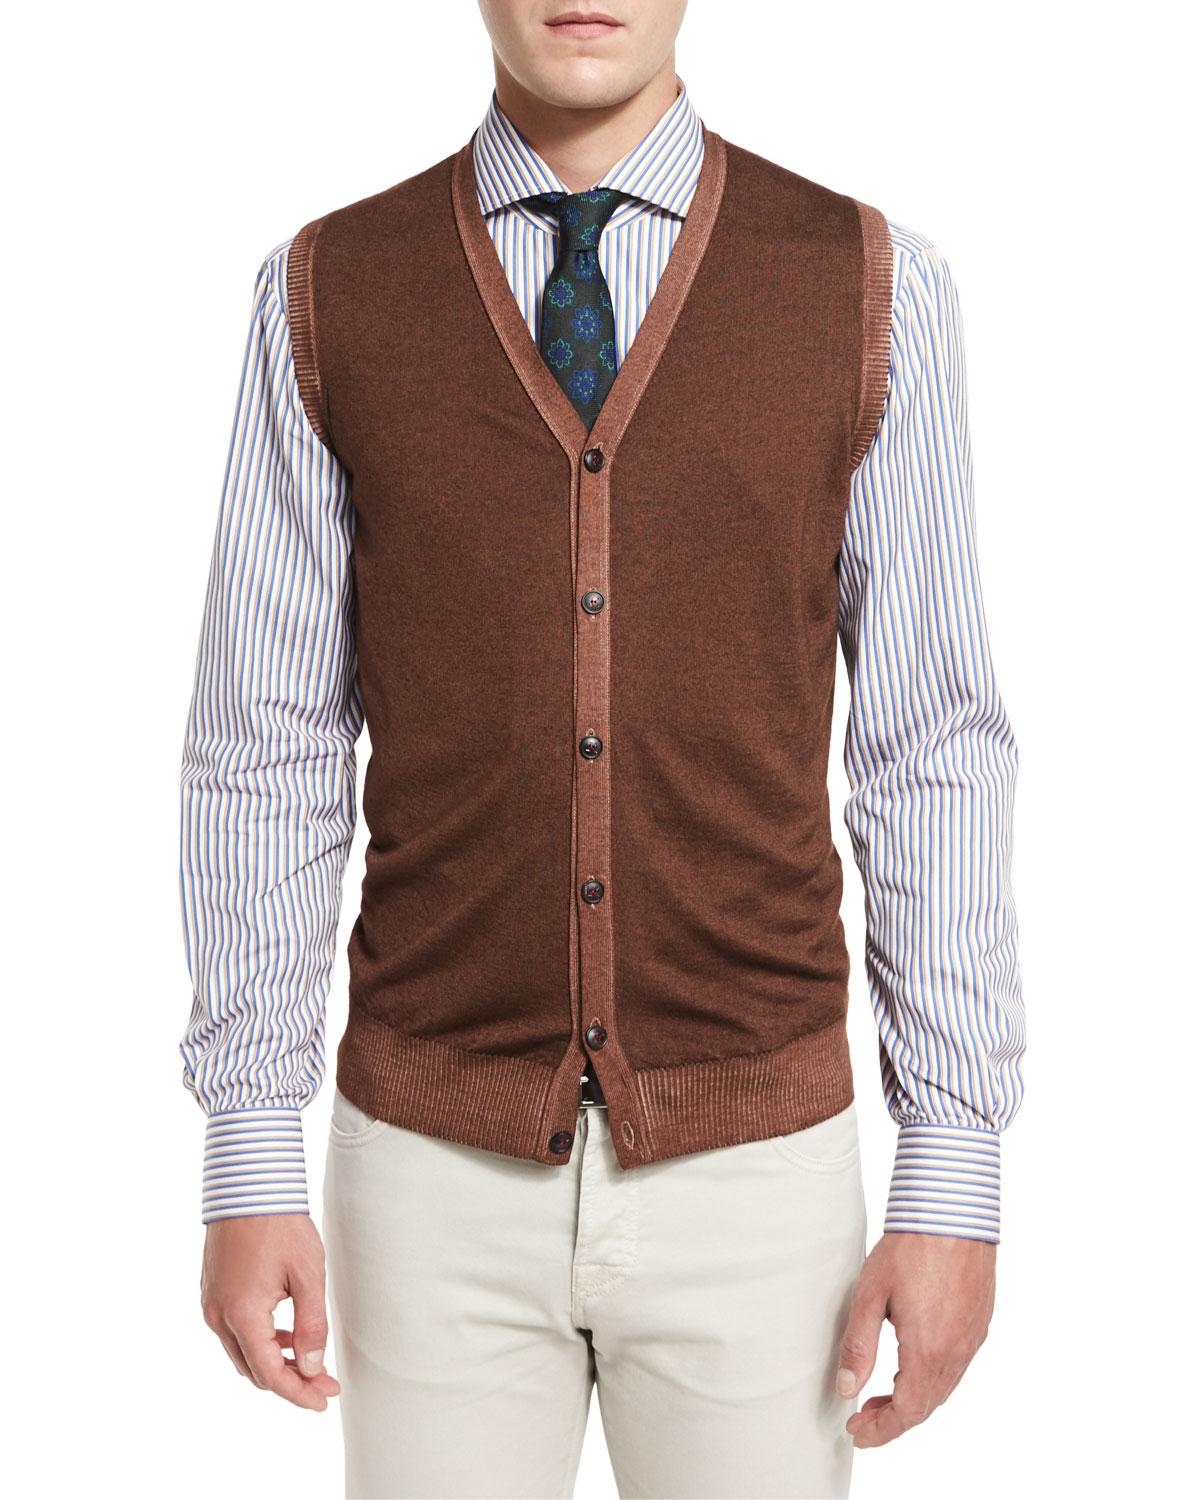 Lyst - Kiton Washed Cashmere Sweater Vest in Brown for Men